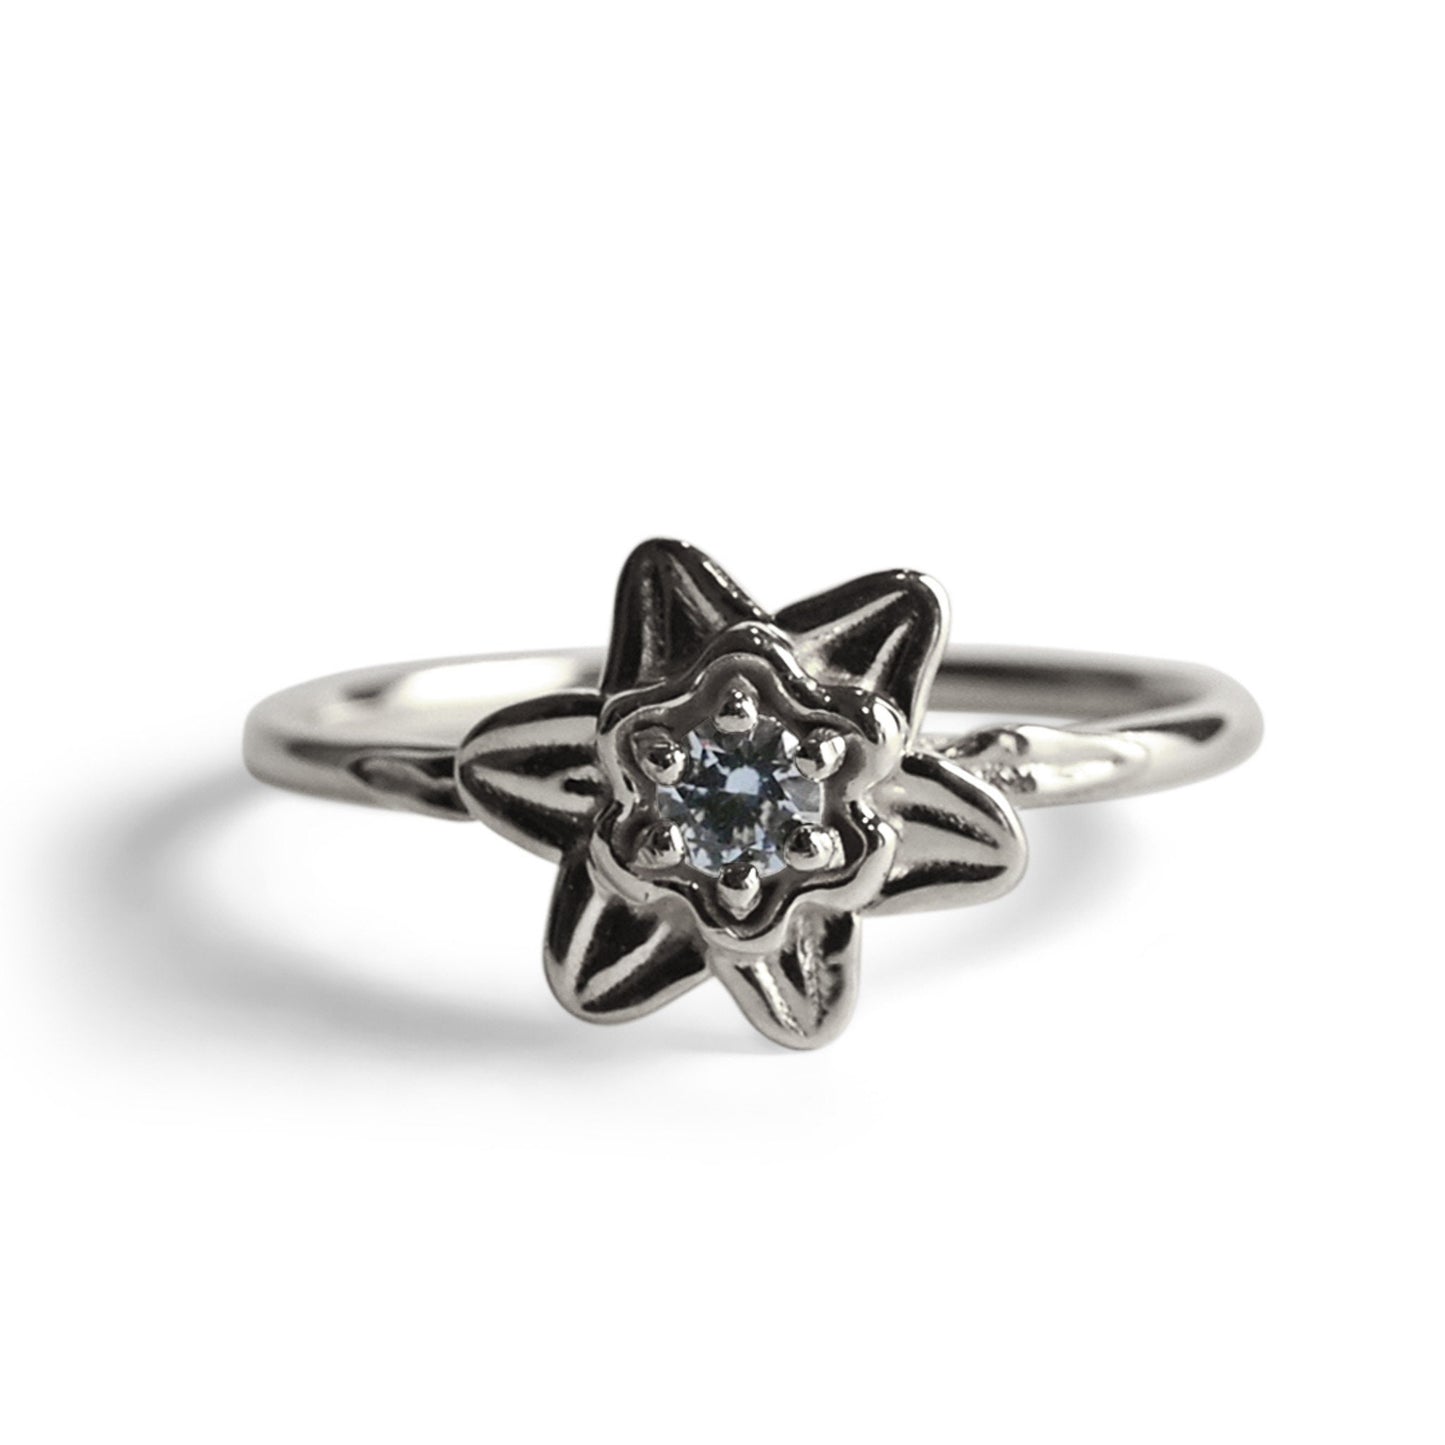 Gift of March Birth Month: Aquamarine Daffodil Ring for New Beginnings, Solid Gold or Silver